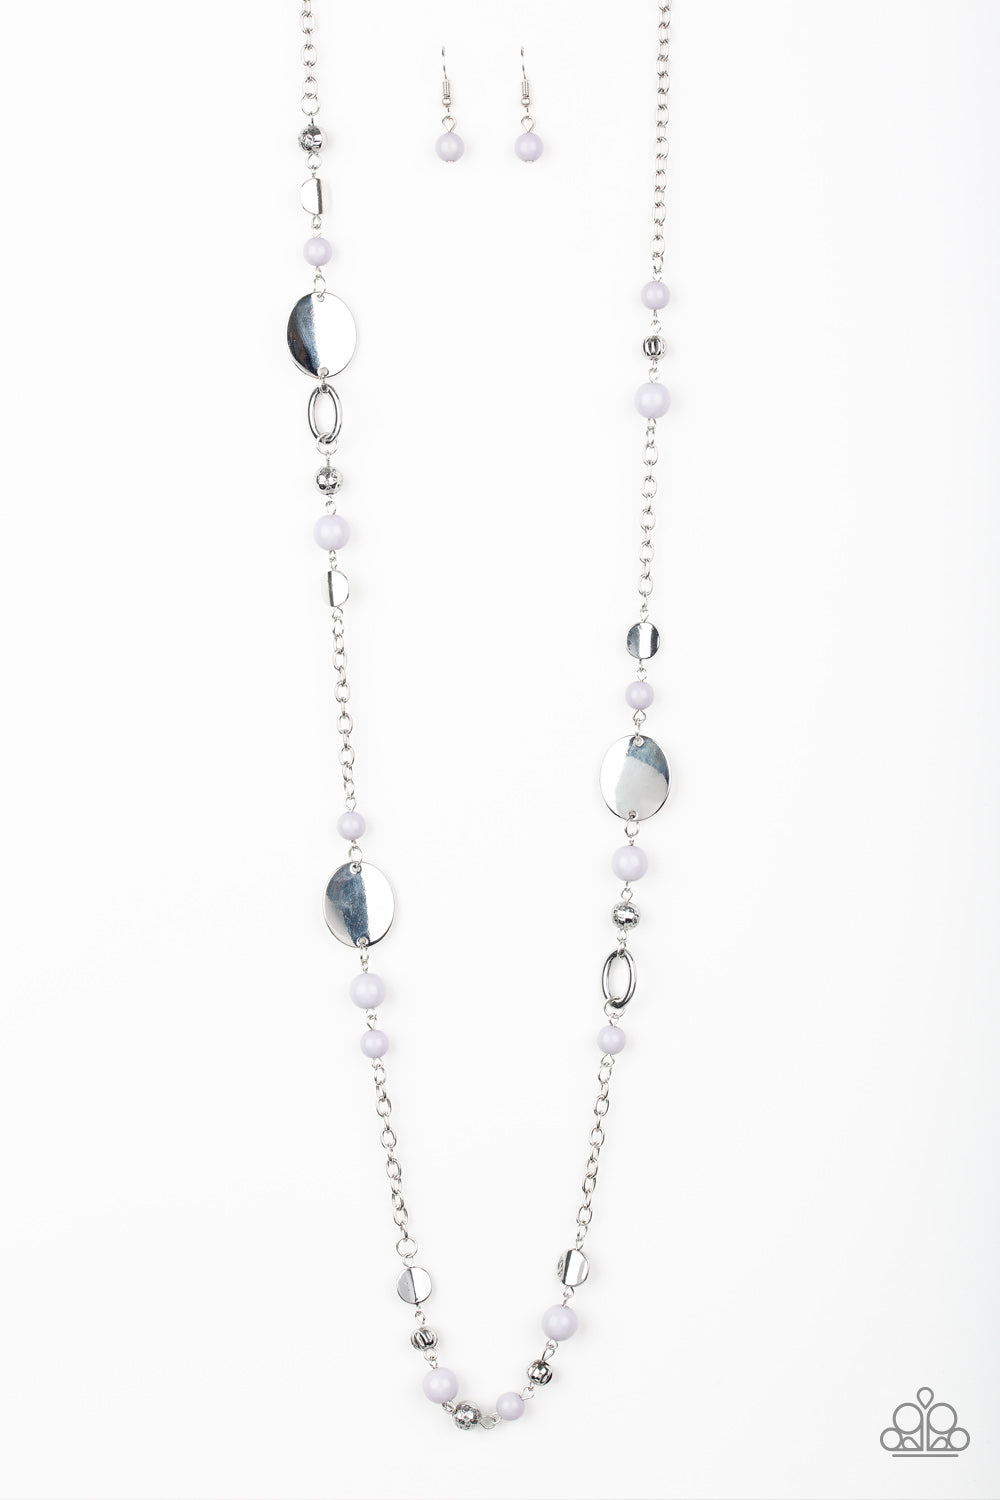 Serenely Springtime None- Silver necklace